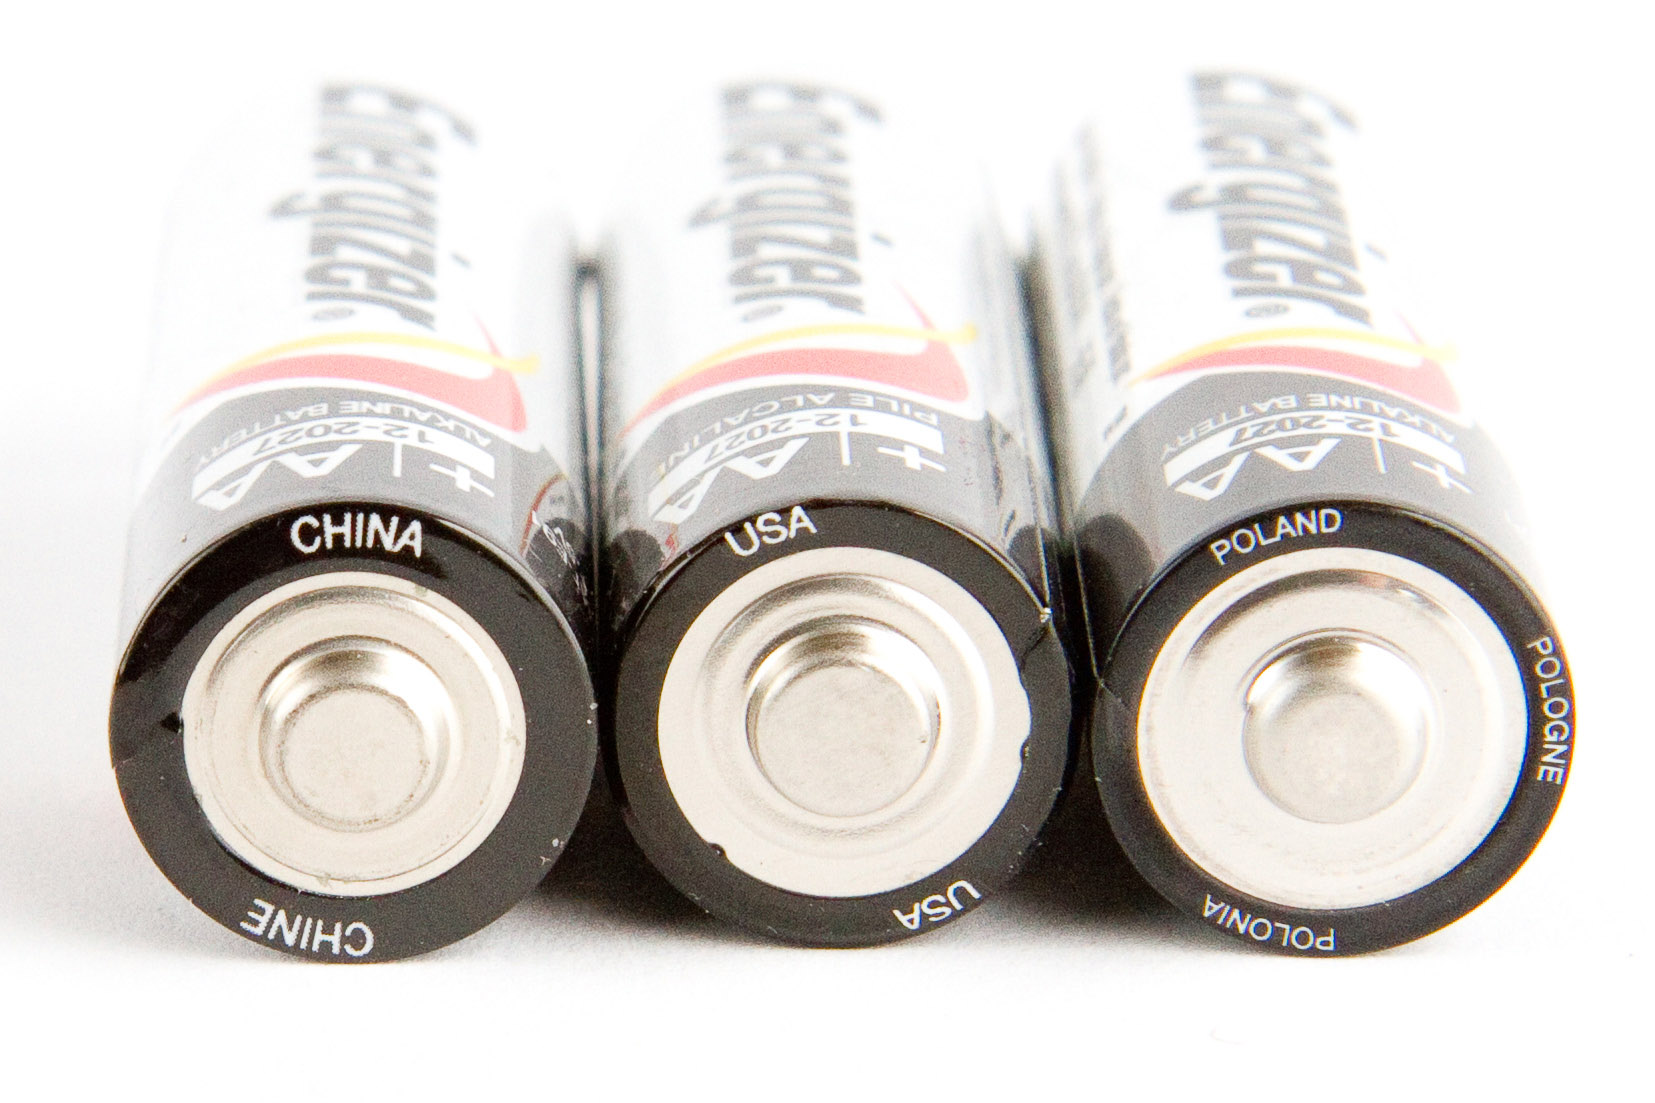 » Are battery brands the same?